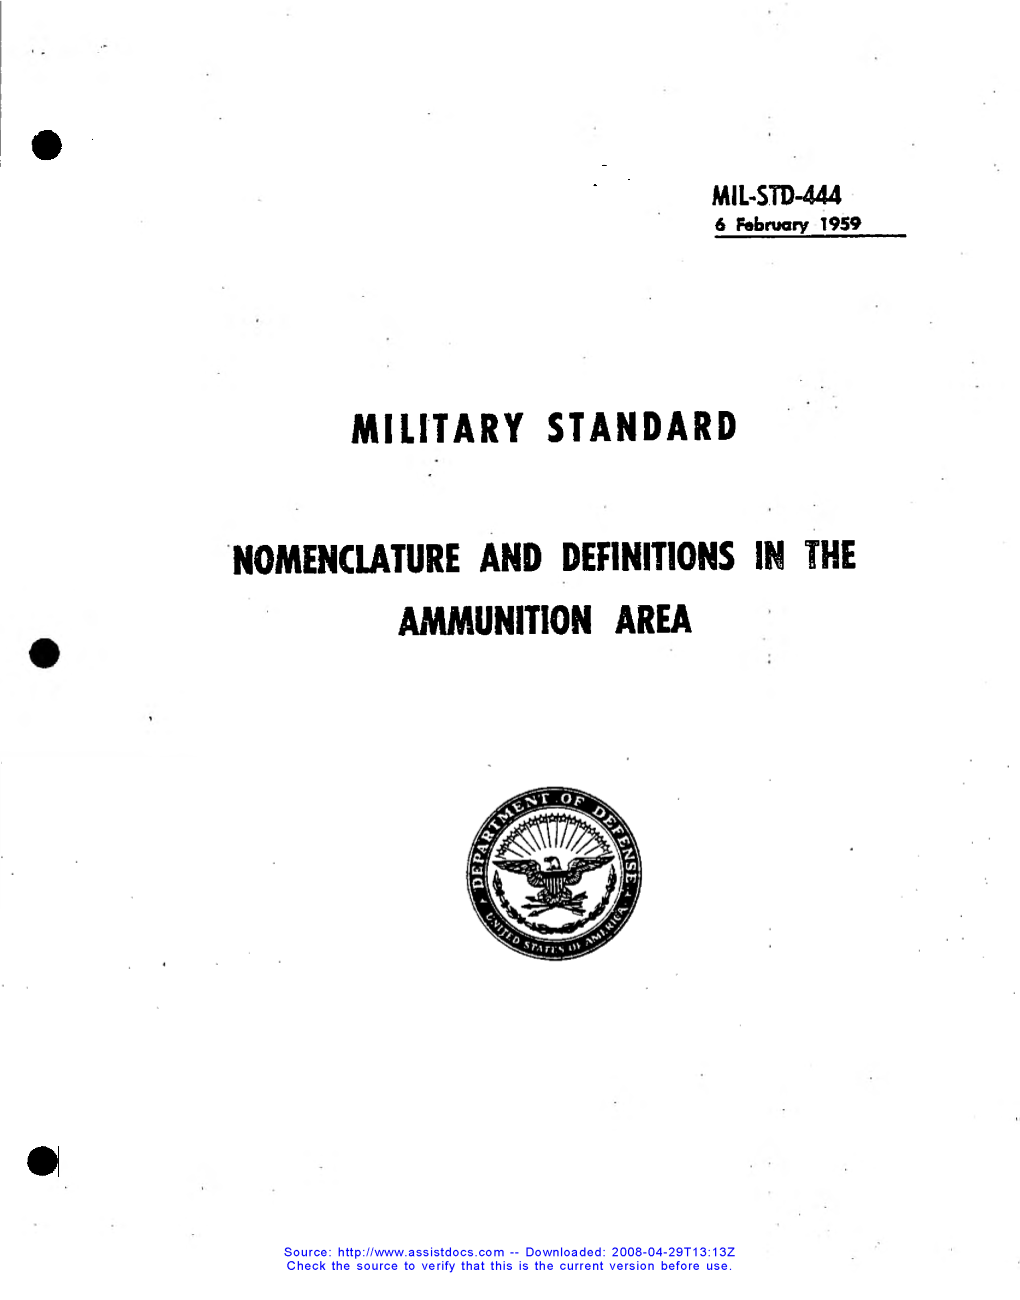 MIL-STD-444, Nomenclature and Definitions in the Ammunition Area